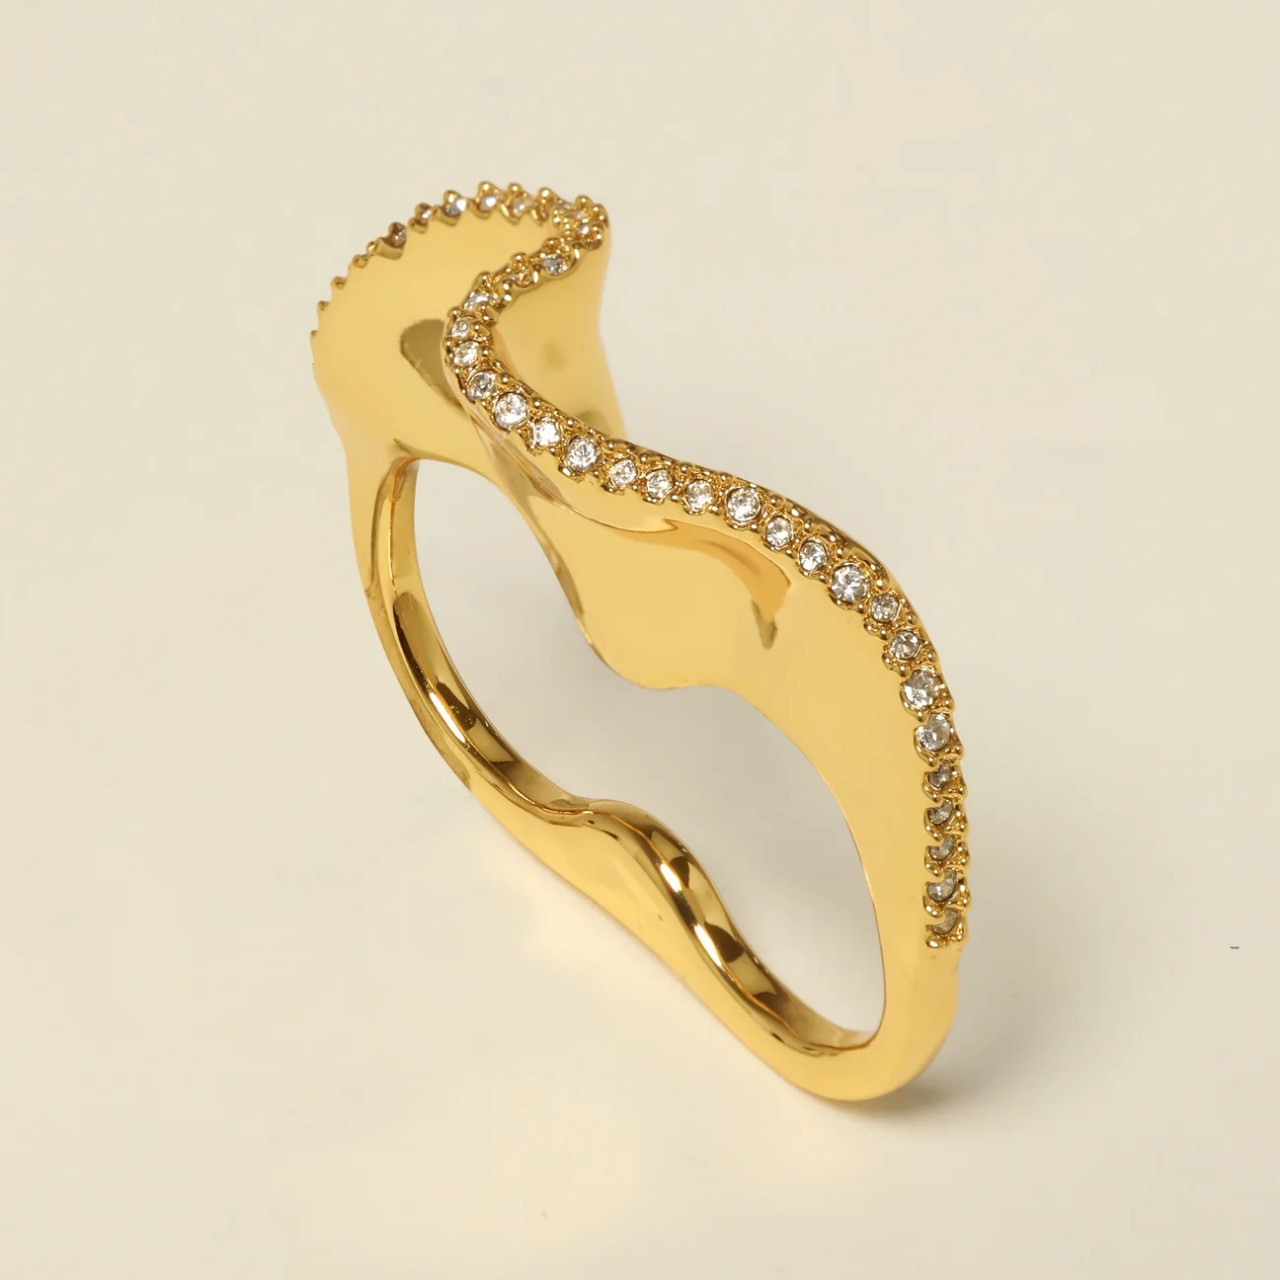 Solanales Wave Ring, Alexis Bittar, tomfoolery